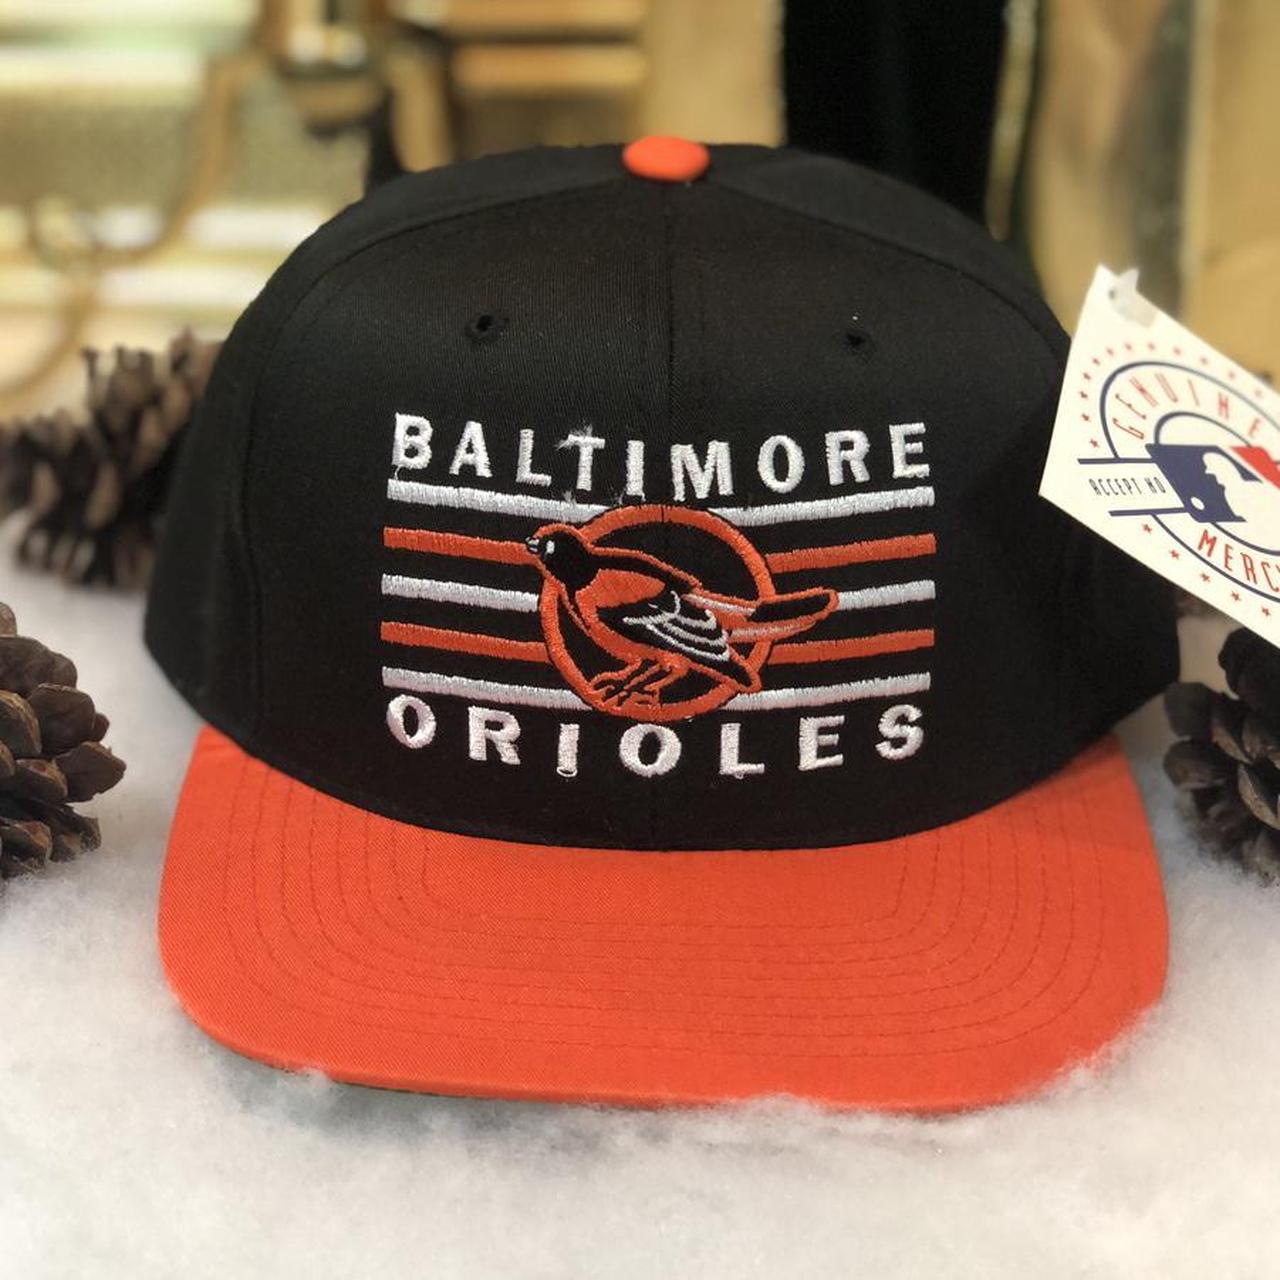 Vintage Deadstock NWT MLB Baltimore Orioles Annco Twill Snapback Hat